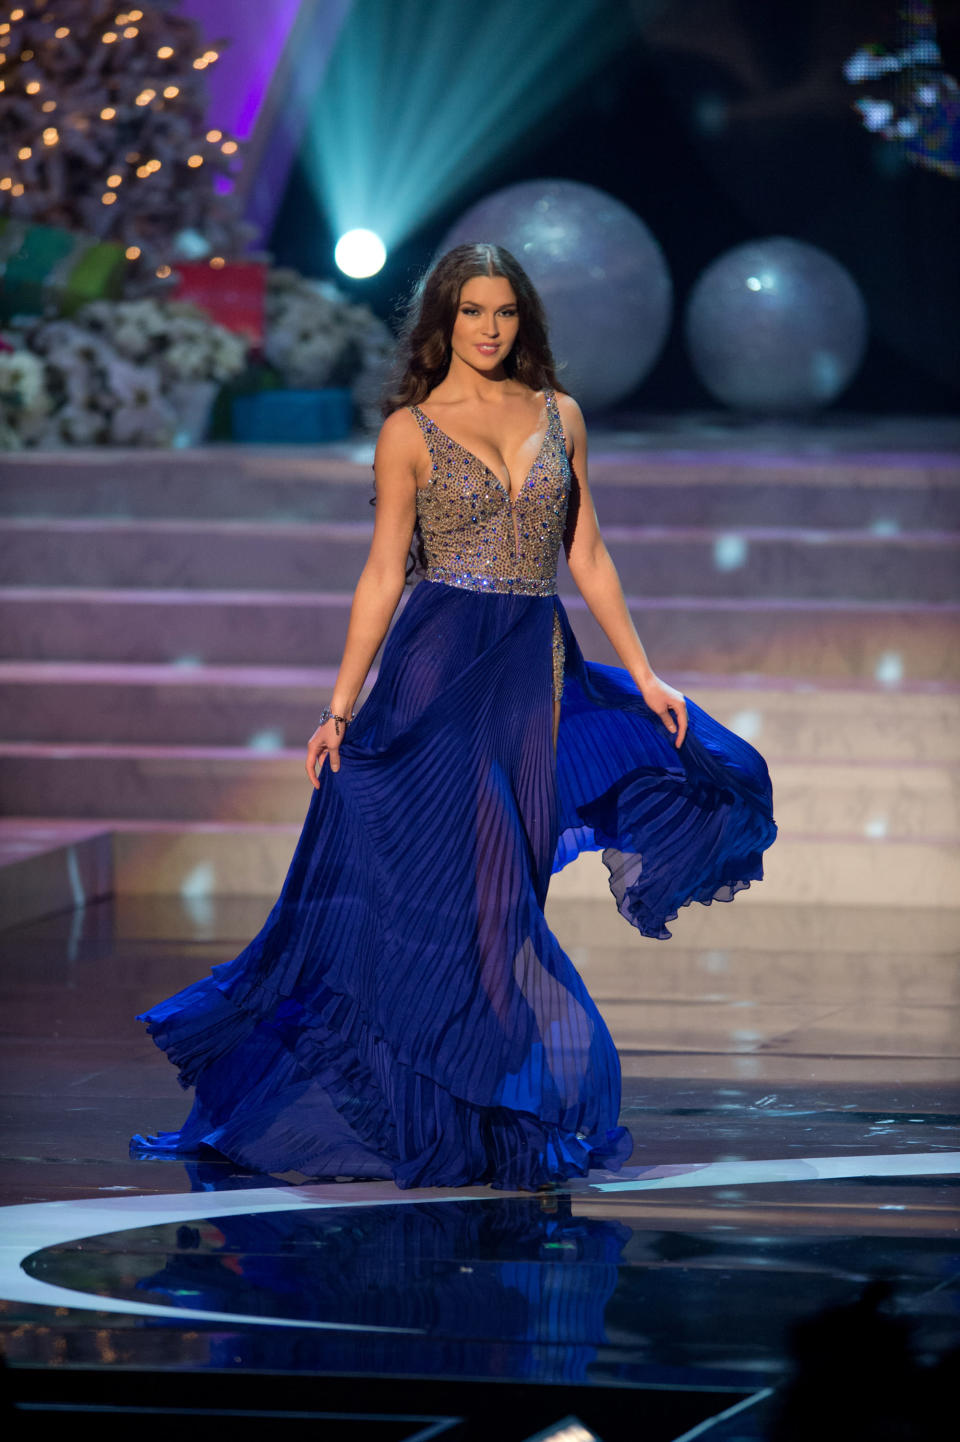 Miss Universe Russia, Elizabeth Golovanova, competes in an evening gown of her choice as one of the top ten contestants during this year's LIVE NBC Telecast of the 2012 Miss Universe Competition at PH Live in Las Vegas, Nevada on December 19, 2012. HO/Miss Universe Organization L.P., LLLP